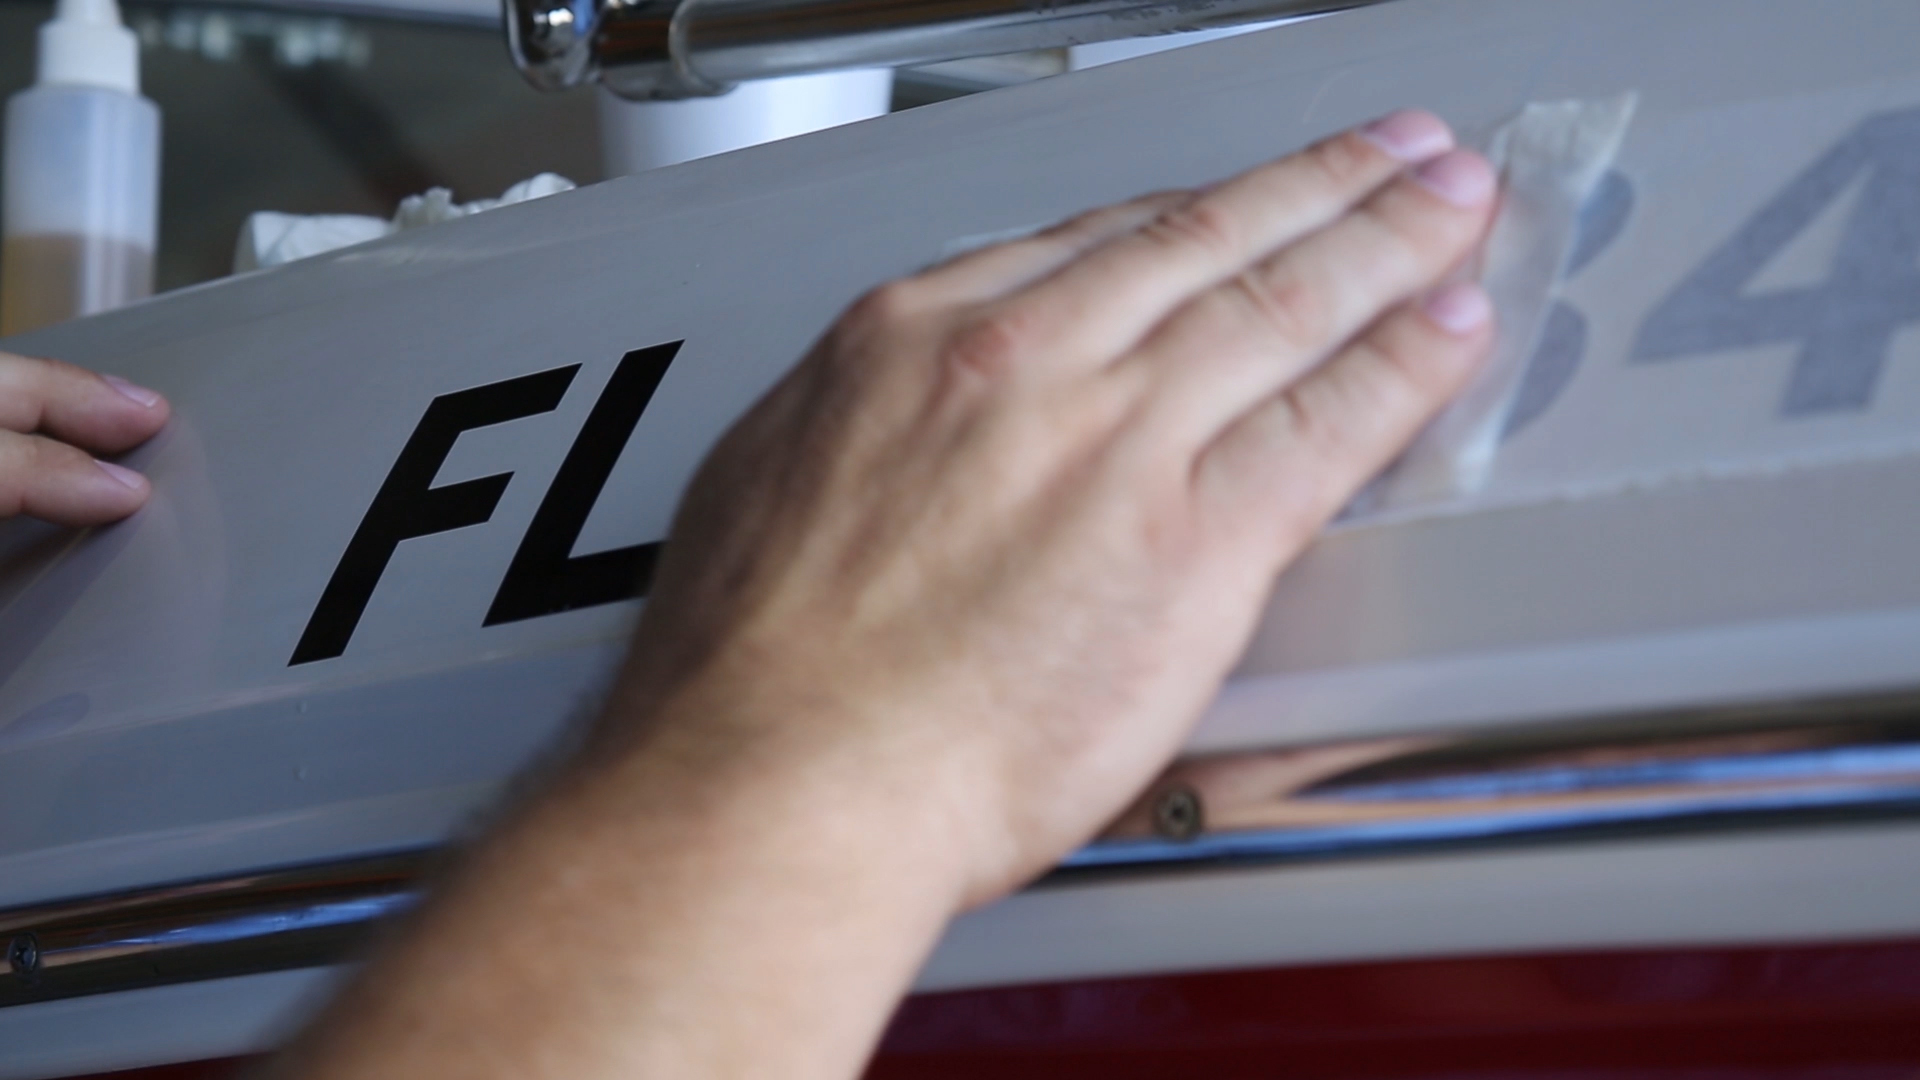 5 Facts Before Choosing Vinyl Lettering for Your Boat Registration